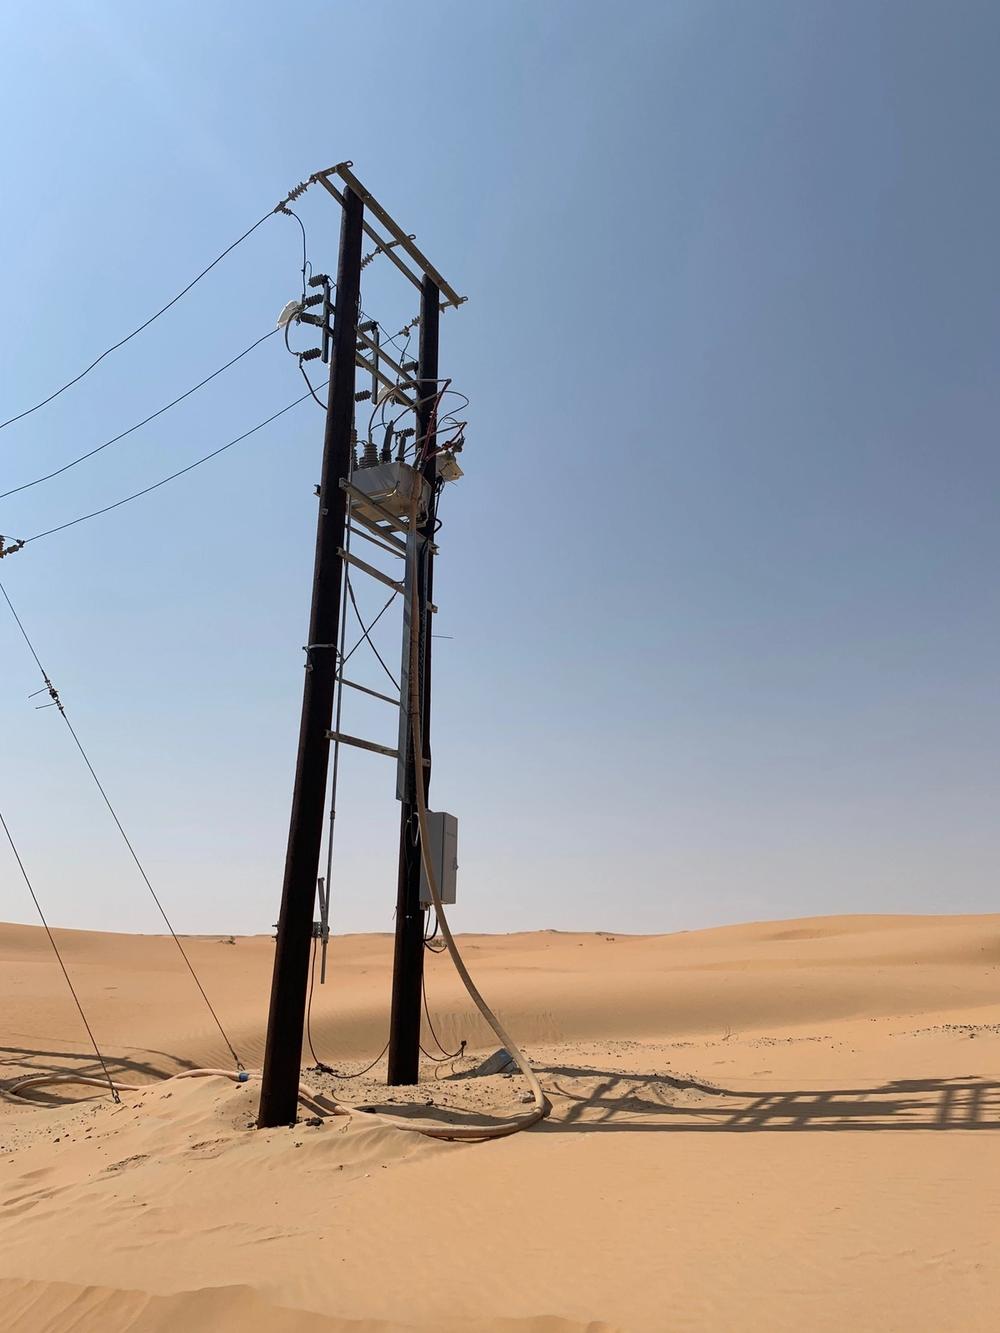 A NOJA Power OSM Recloser with RC10 Control in service in an Arabian Desert.